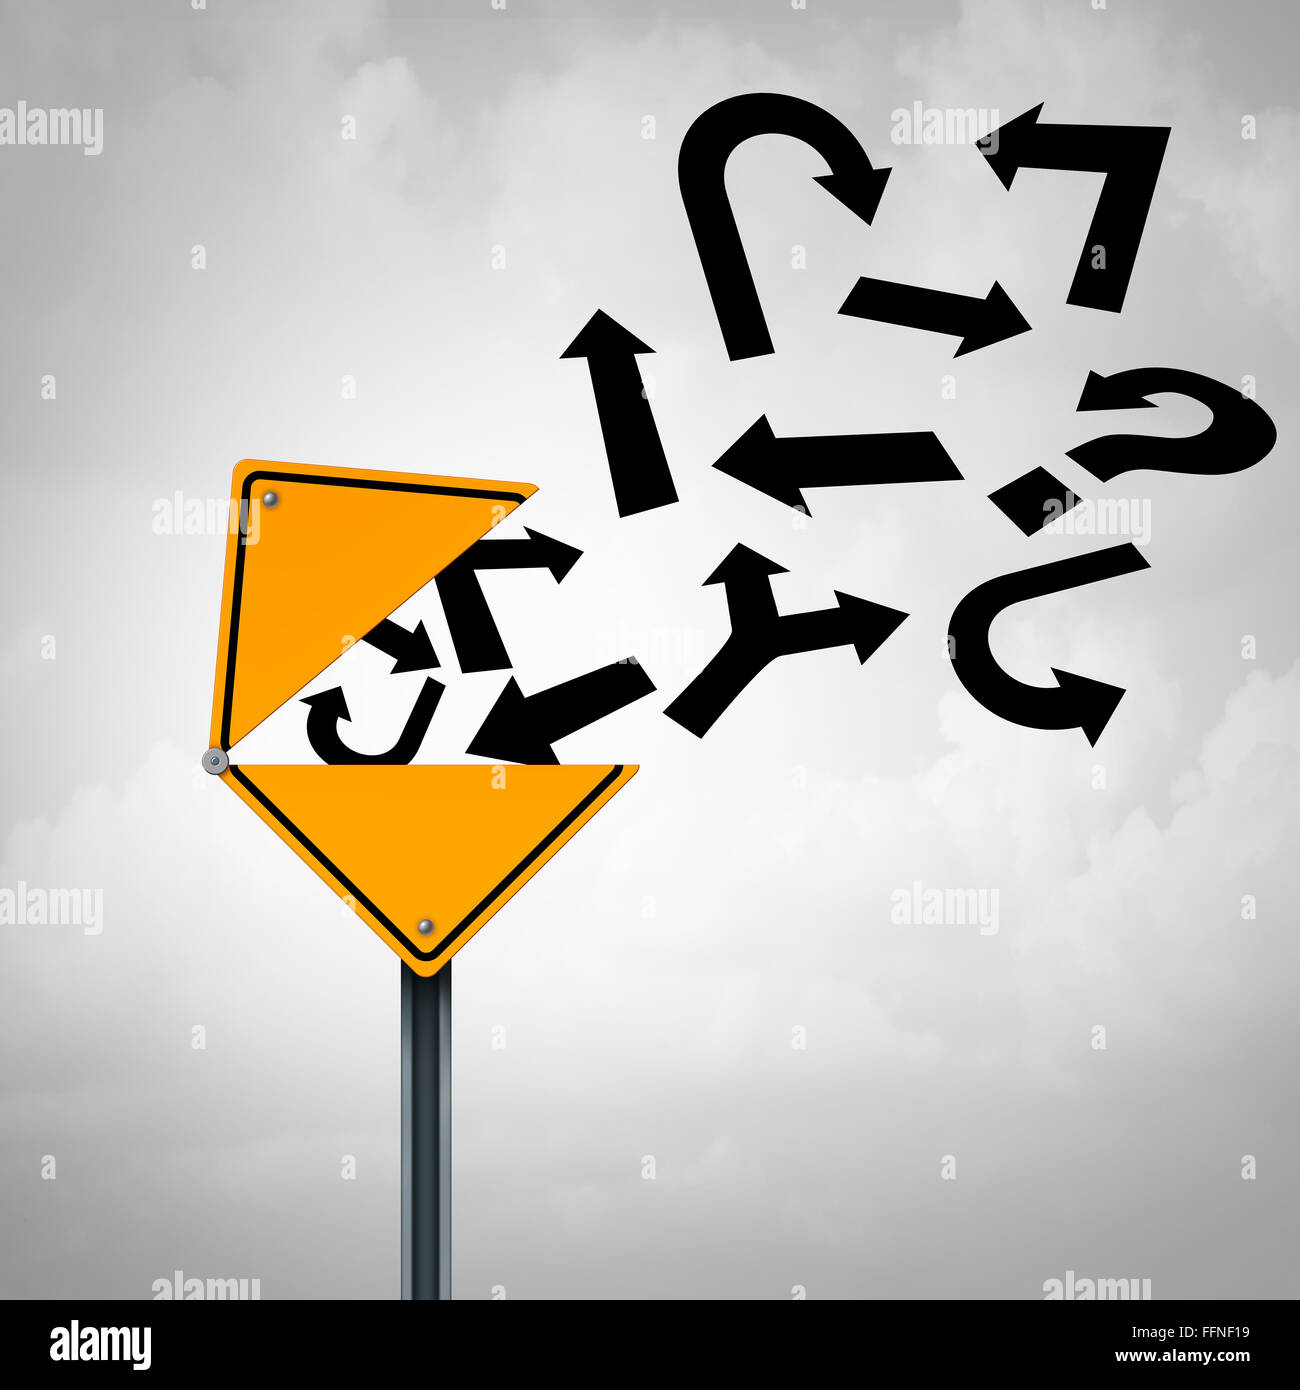 Business guidance communication concept as an open yellow traffic sign releasing a group of different direction arrows as a metaphor for financial or legal advice. Stock Photo